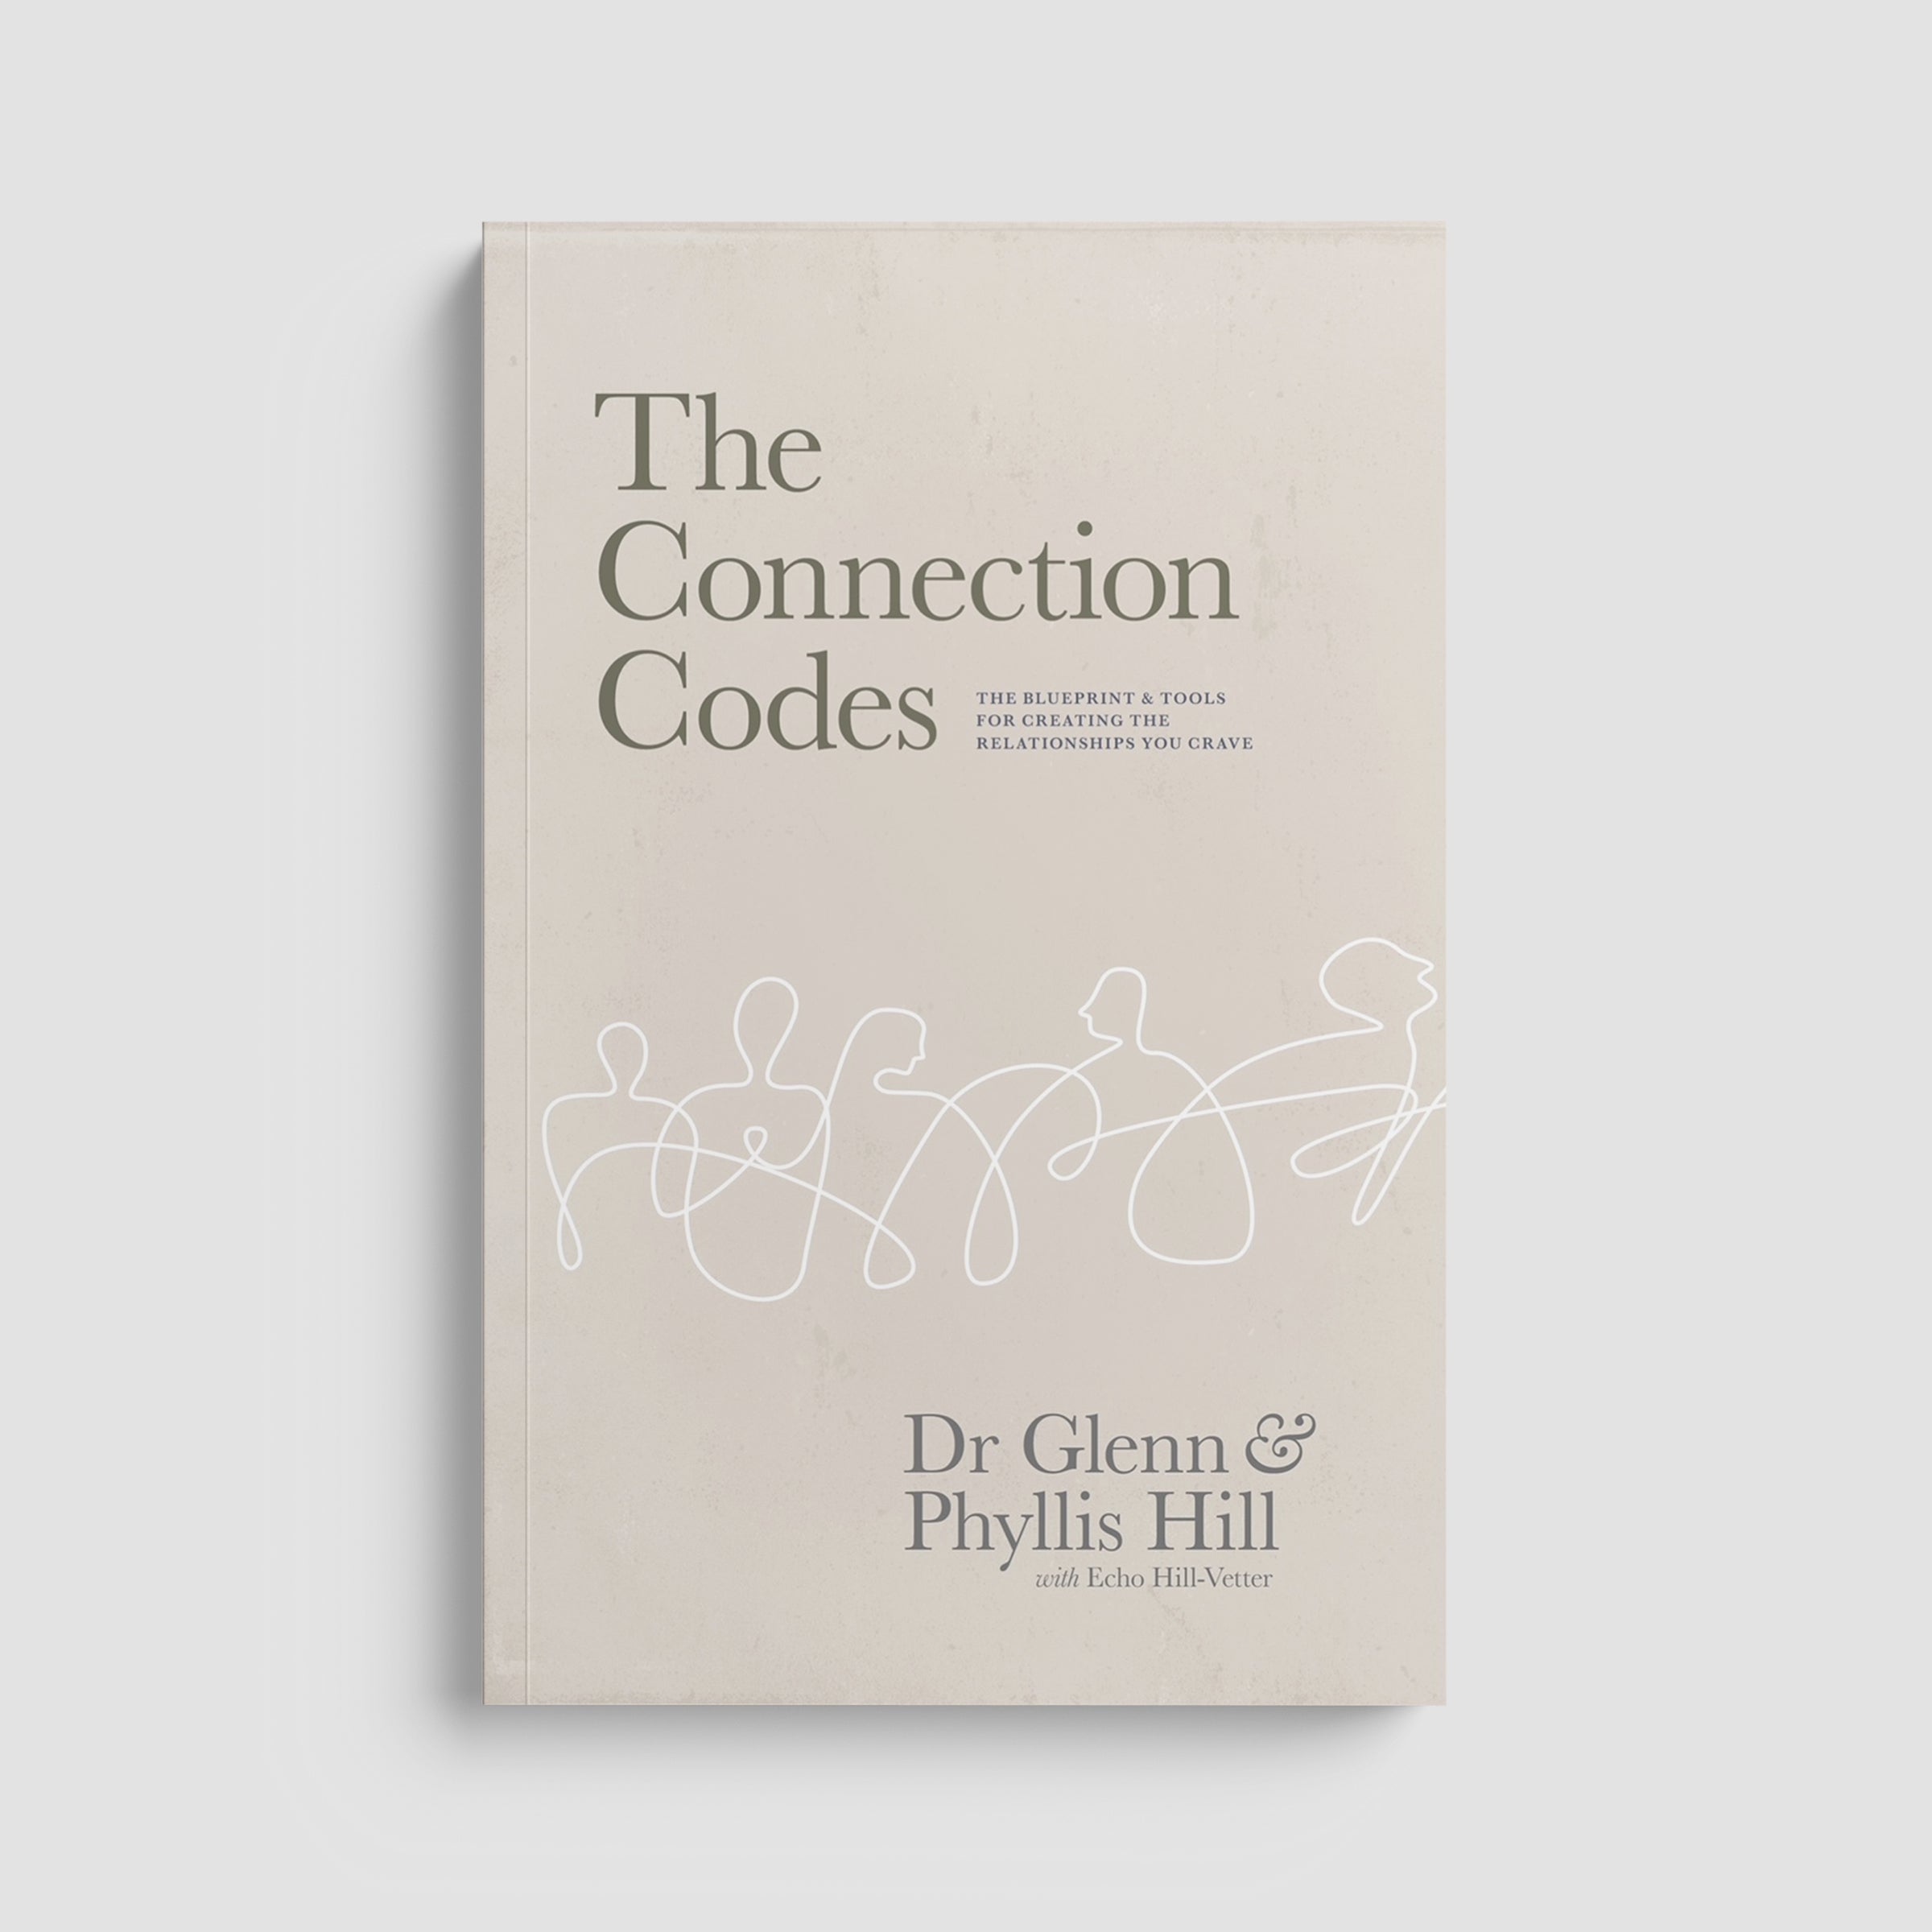 The Connection Codes: The Blueprint & Tools for Creating the Relationships You